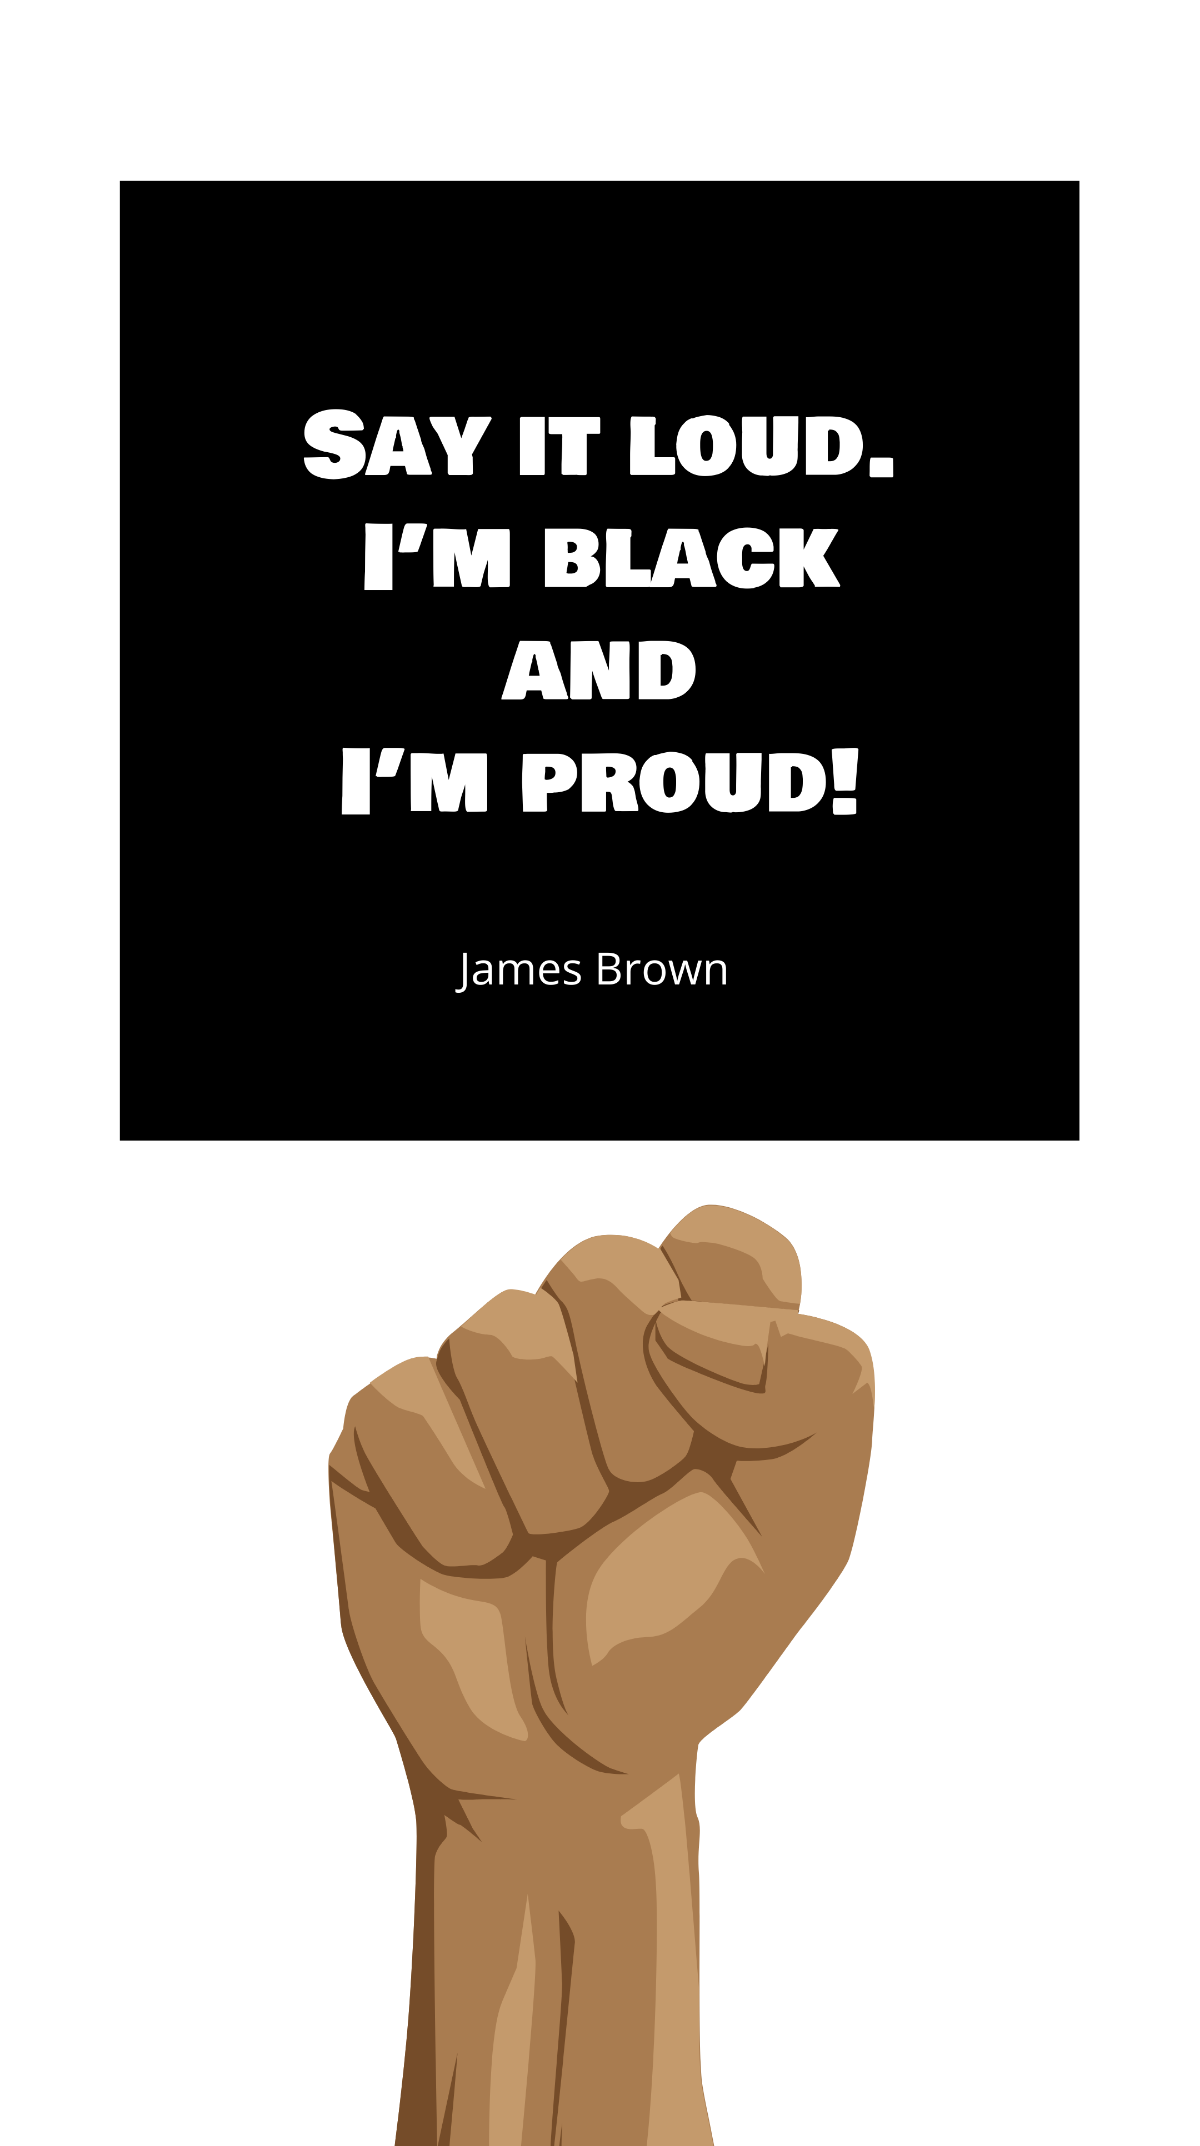 James Brown - Say it loud. I’m black and I’m proud! Template